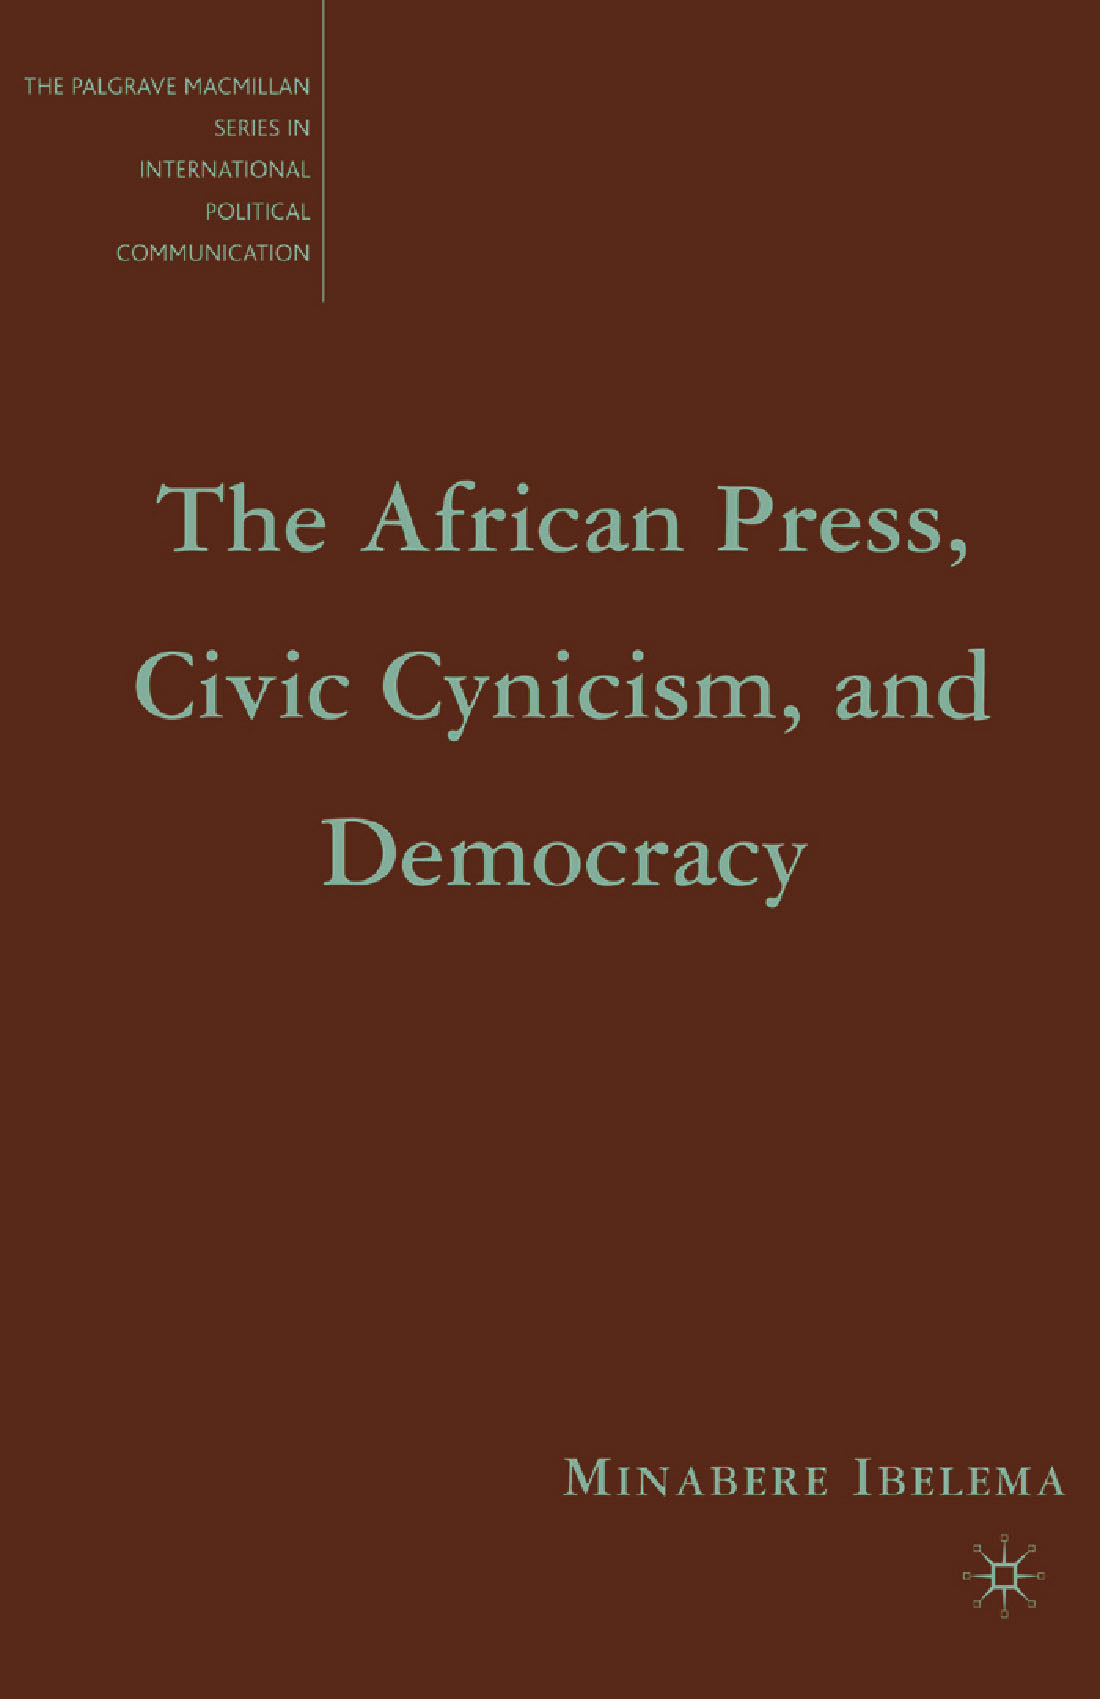 Ibelema, Minabere - The African Press, Civic Cynicism, and Democracy, ebook